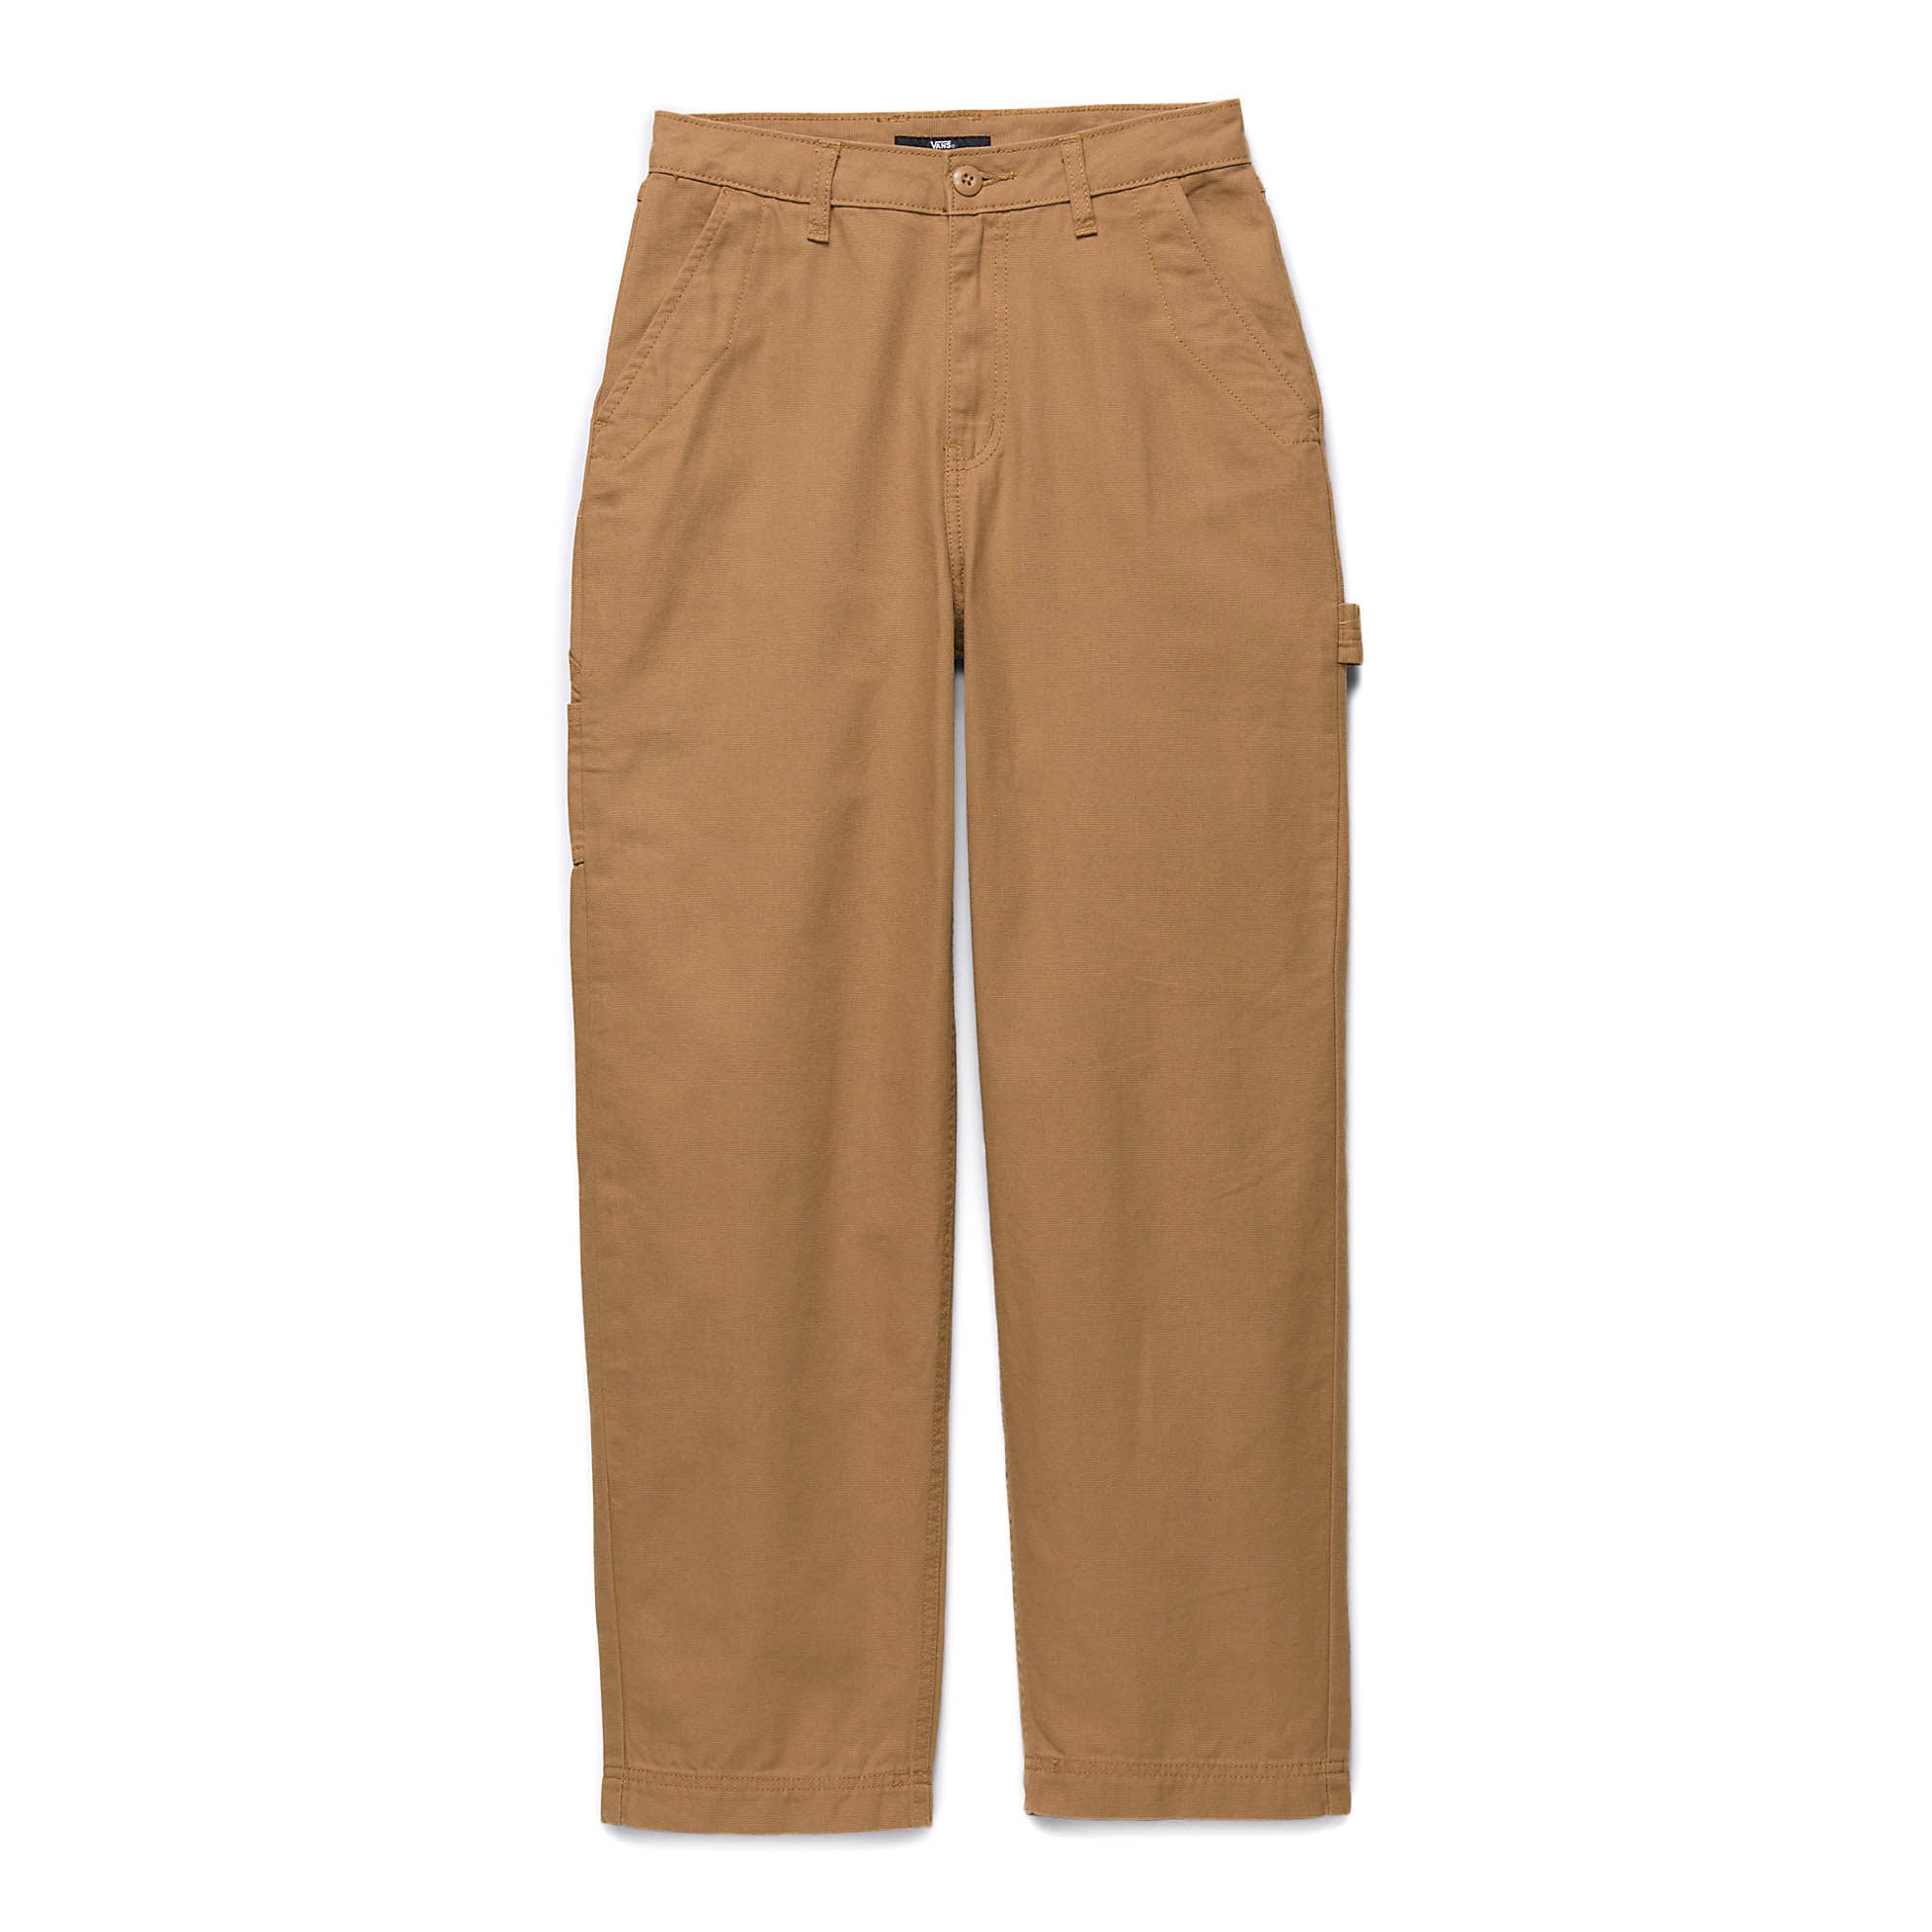 Womens Ground Work Pant - Tobacco Brown